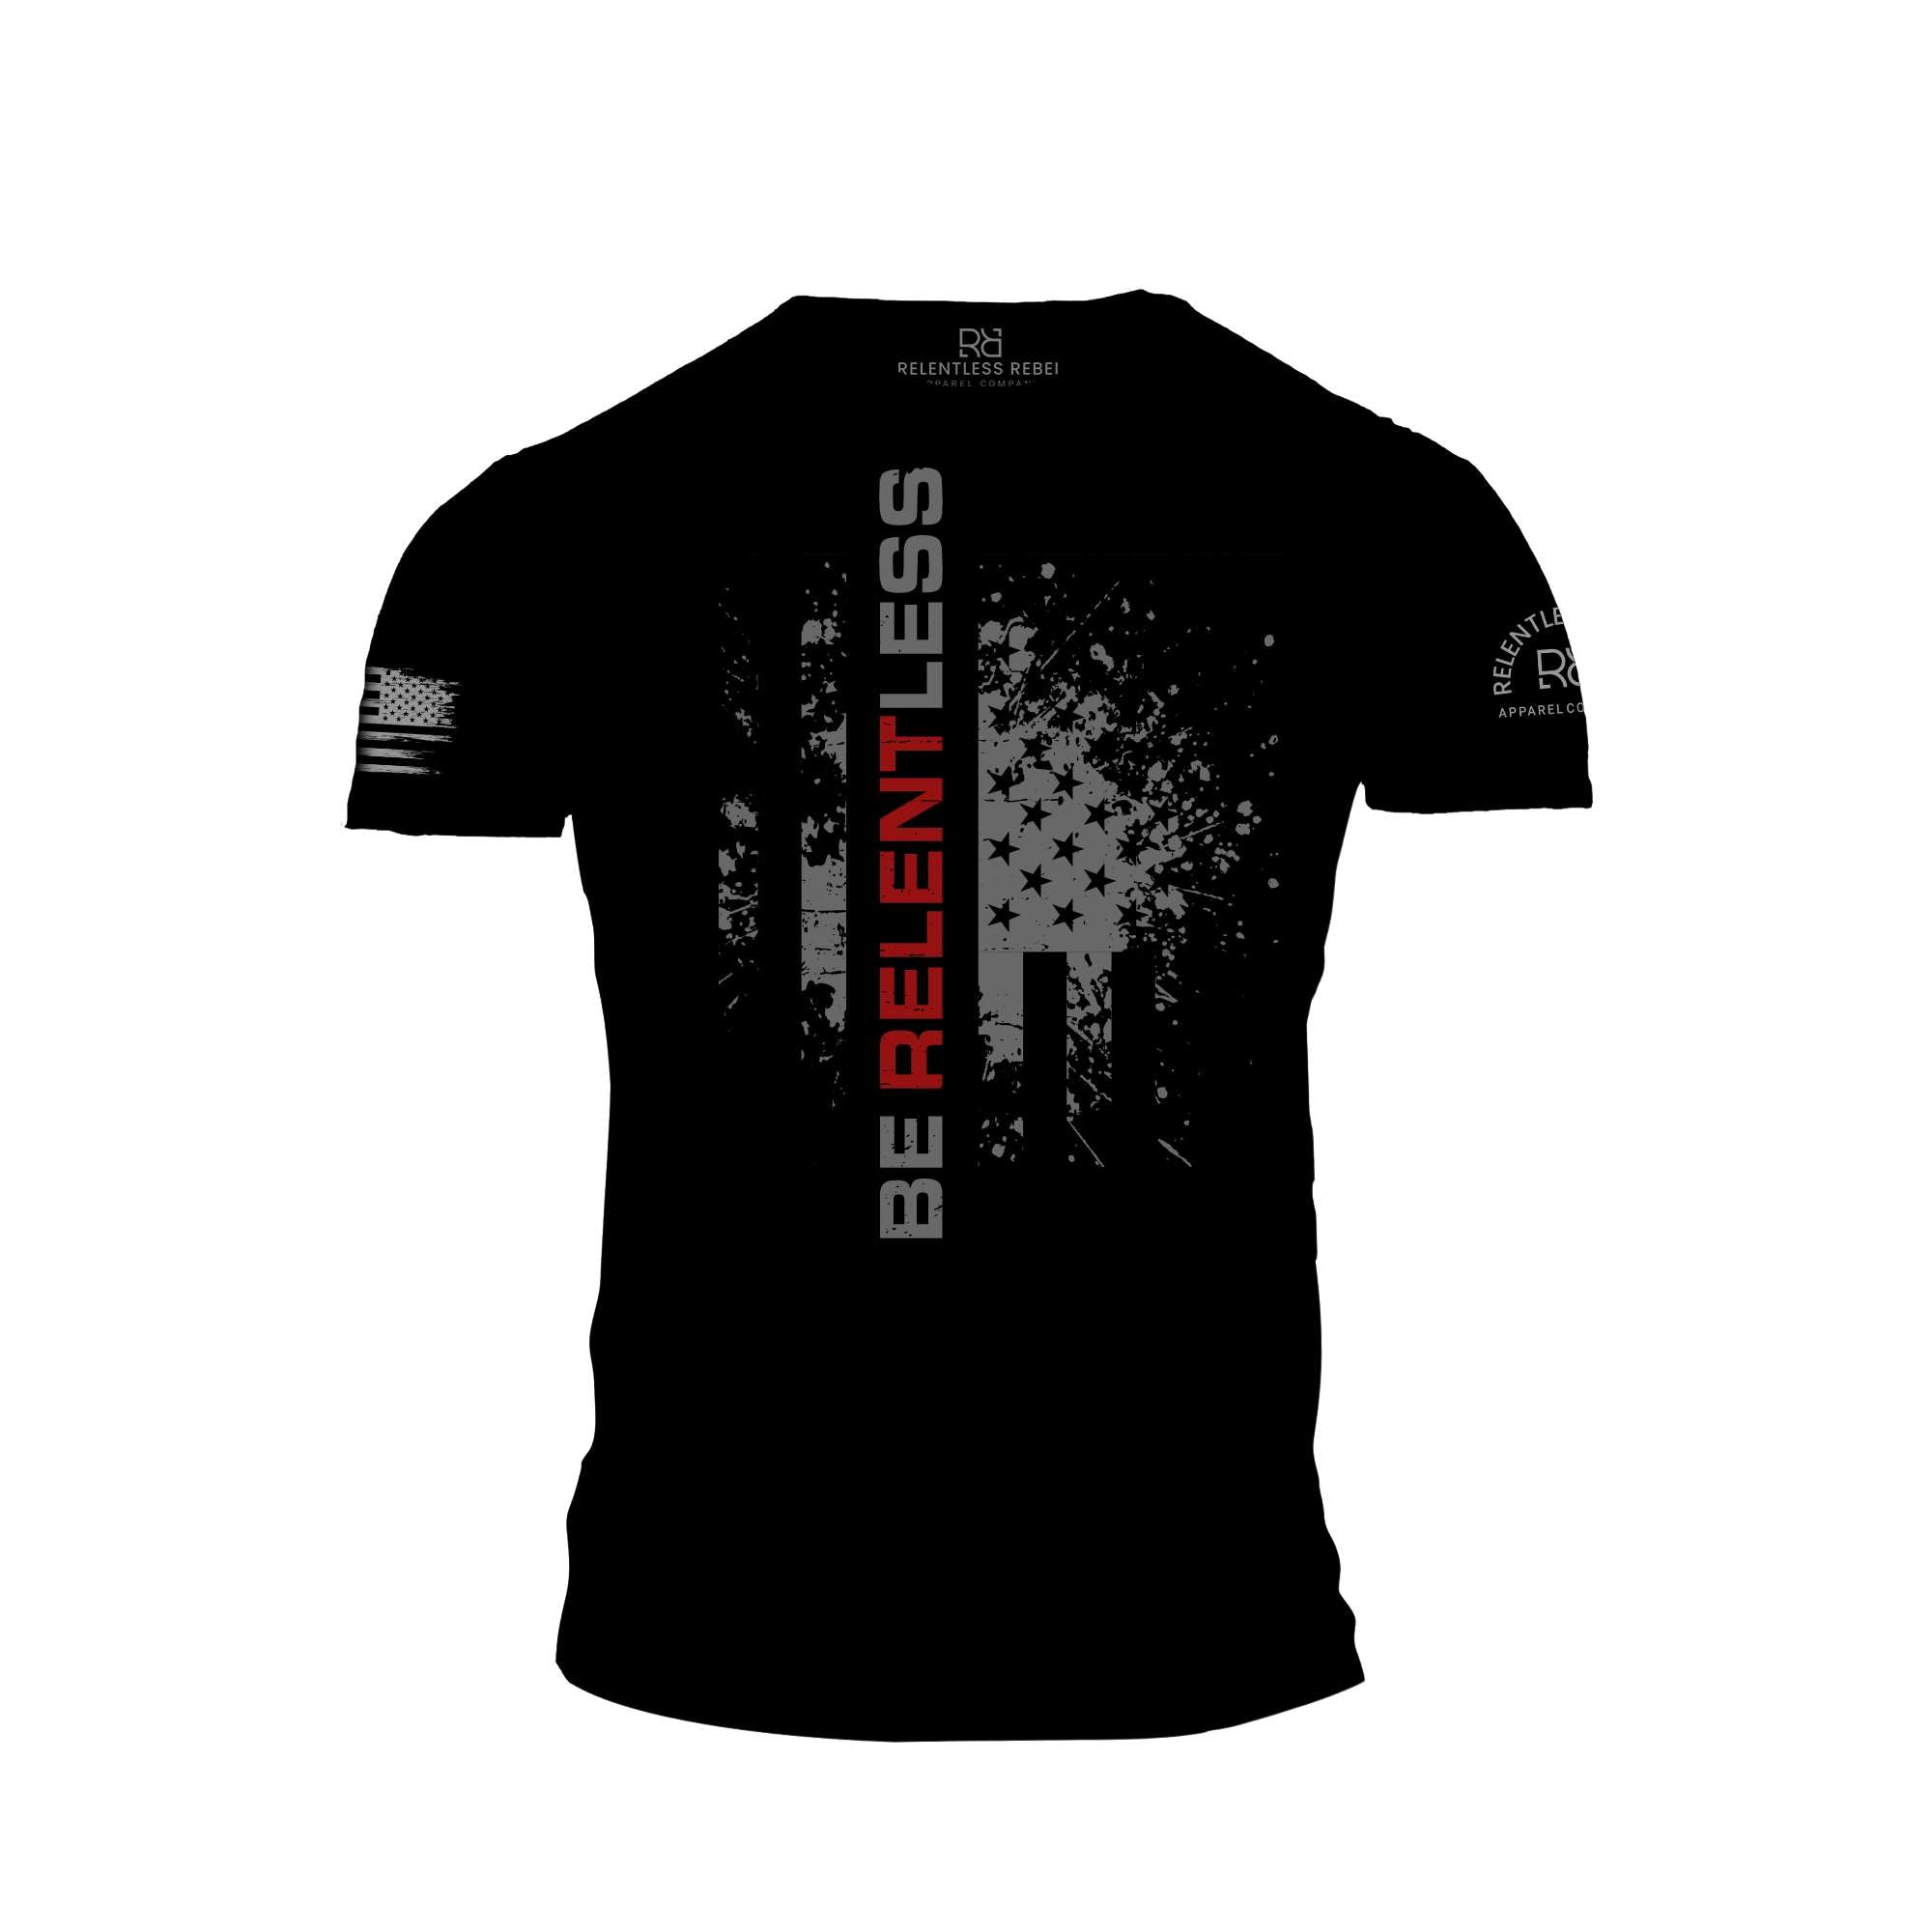 Premium Tri-Blend Clothing for the Relentless Rebel in you.